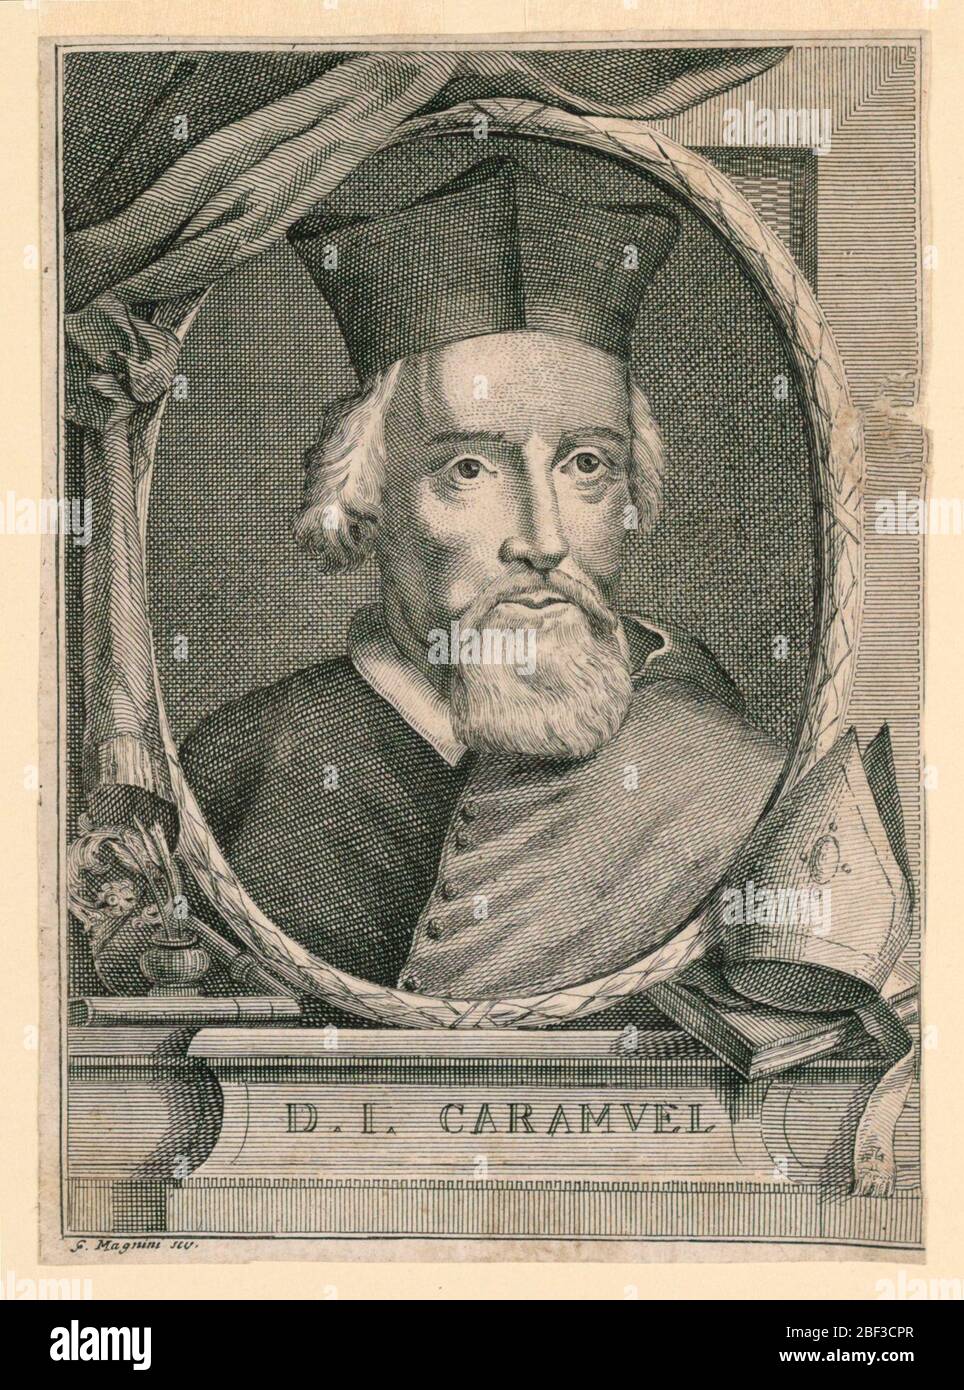 Portrait of Dr Juan Caramuel de Loblokowitz. Portrait bust in frontal view. The sitter, an old man, is wearing a cardinal's cap, a scholar's jacket and a coat over his left shoulder. The portrait is in an oval frame which rests on a pedestal. Stock Photo